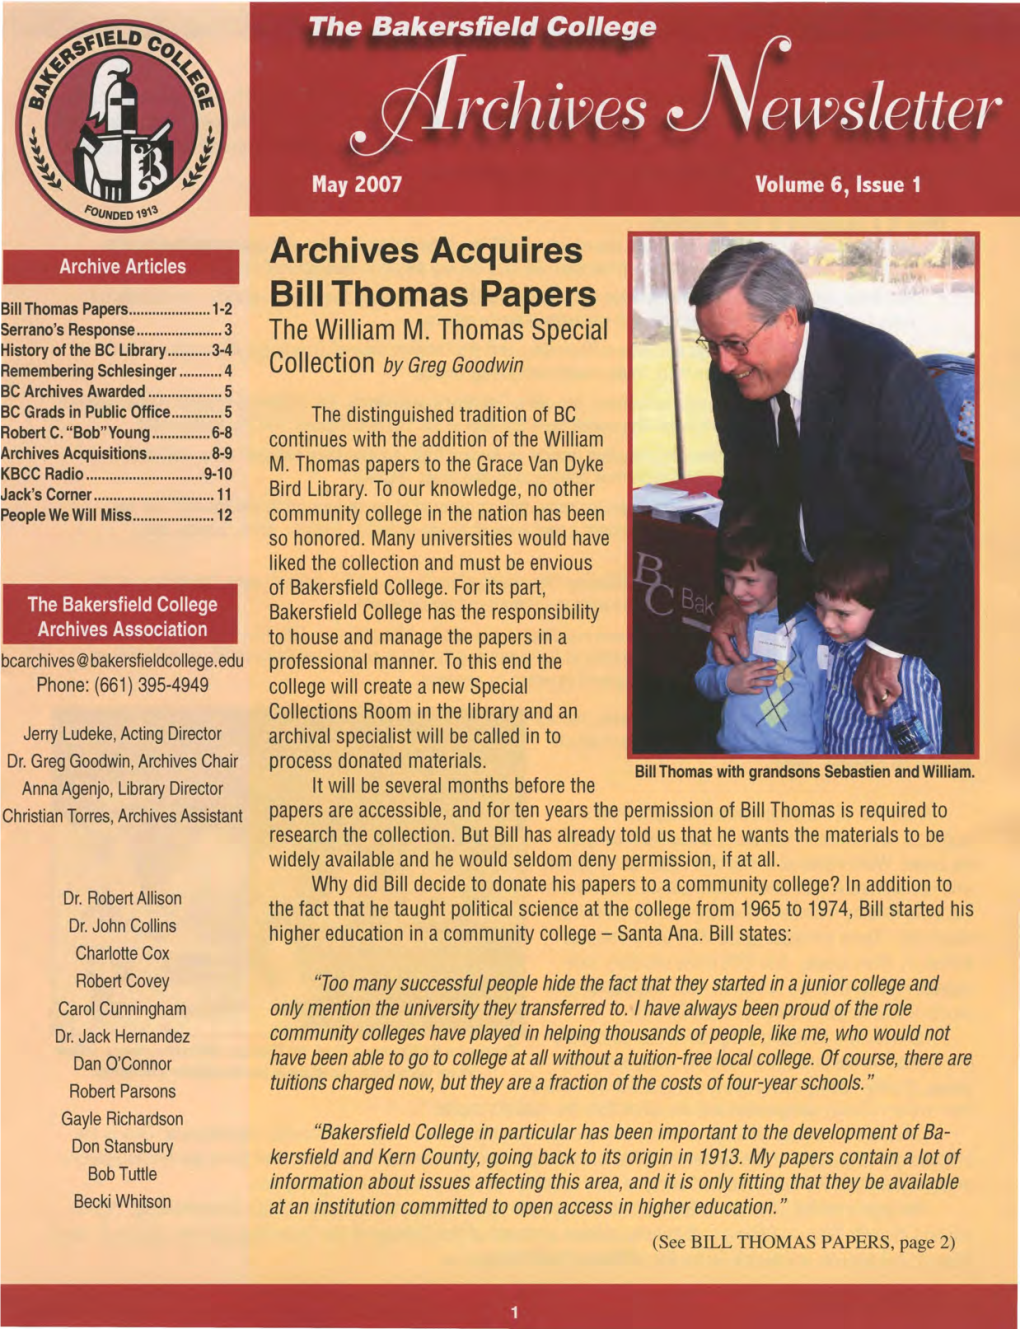 Archives Acquires Bill Thomas Papers